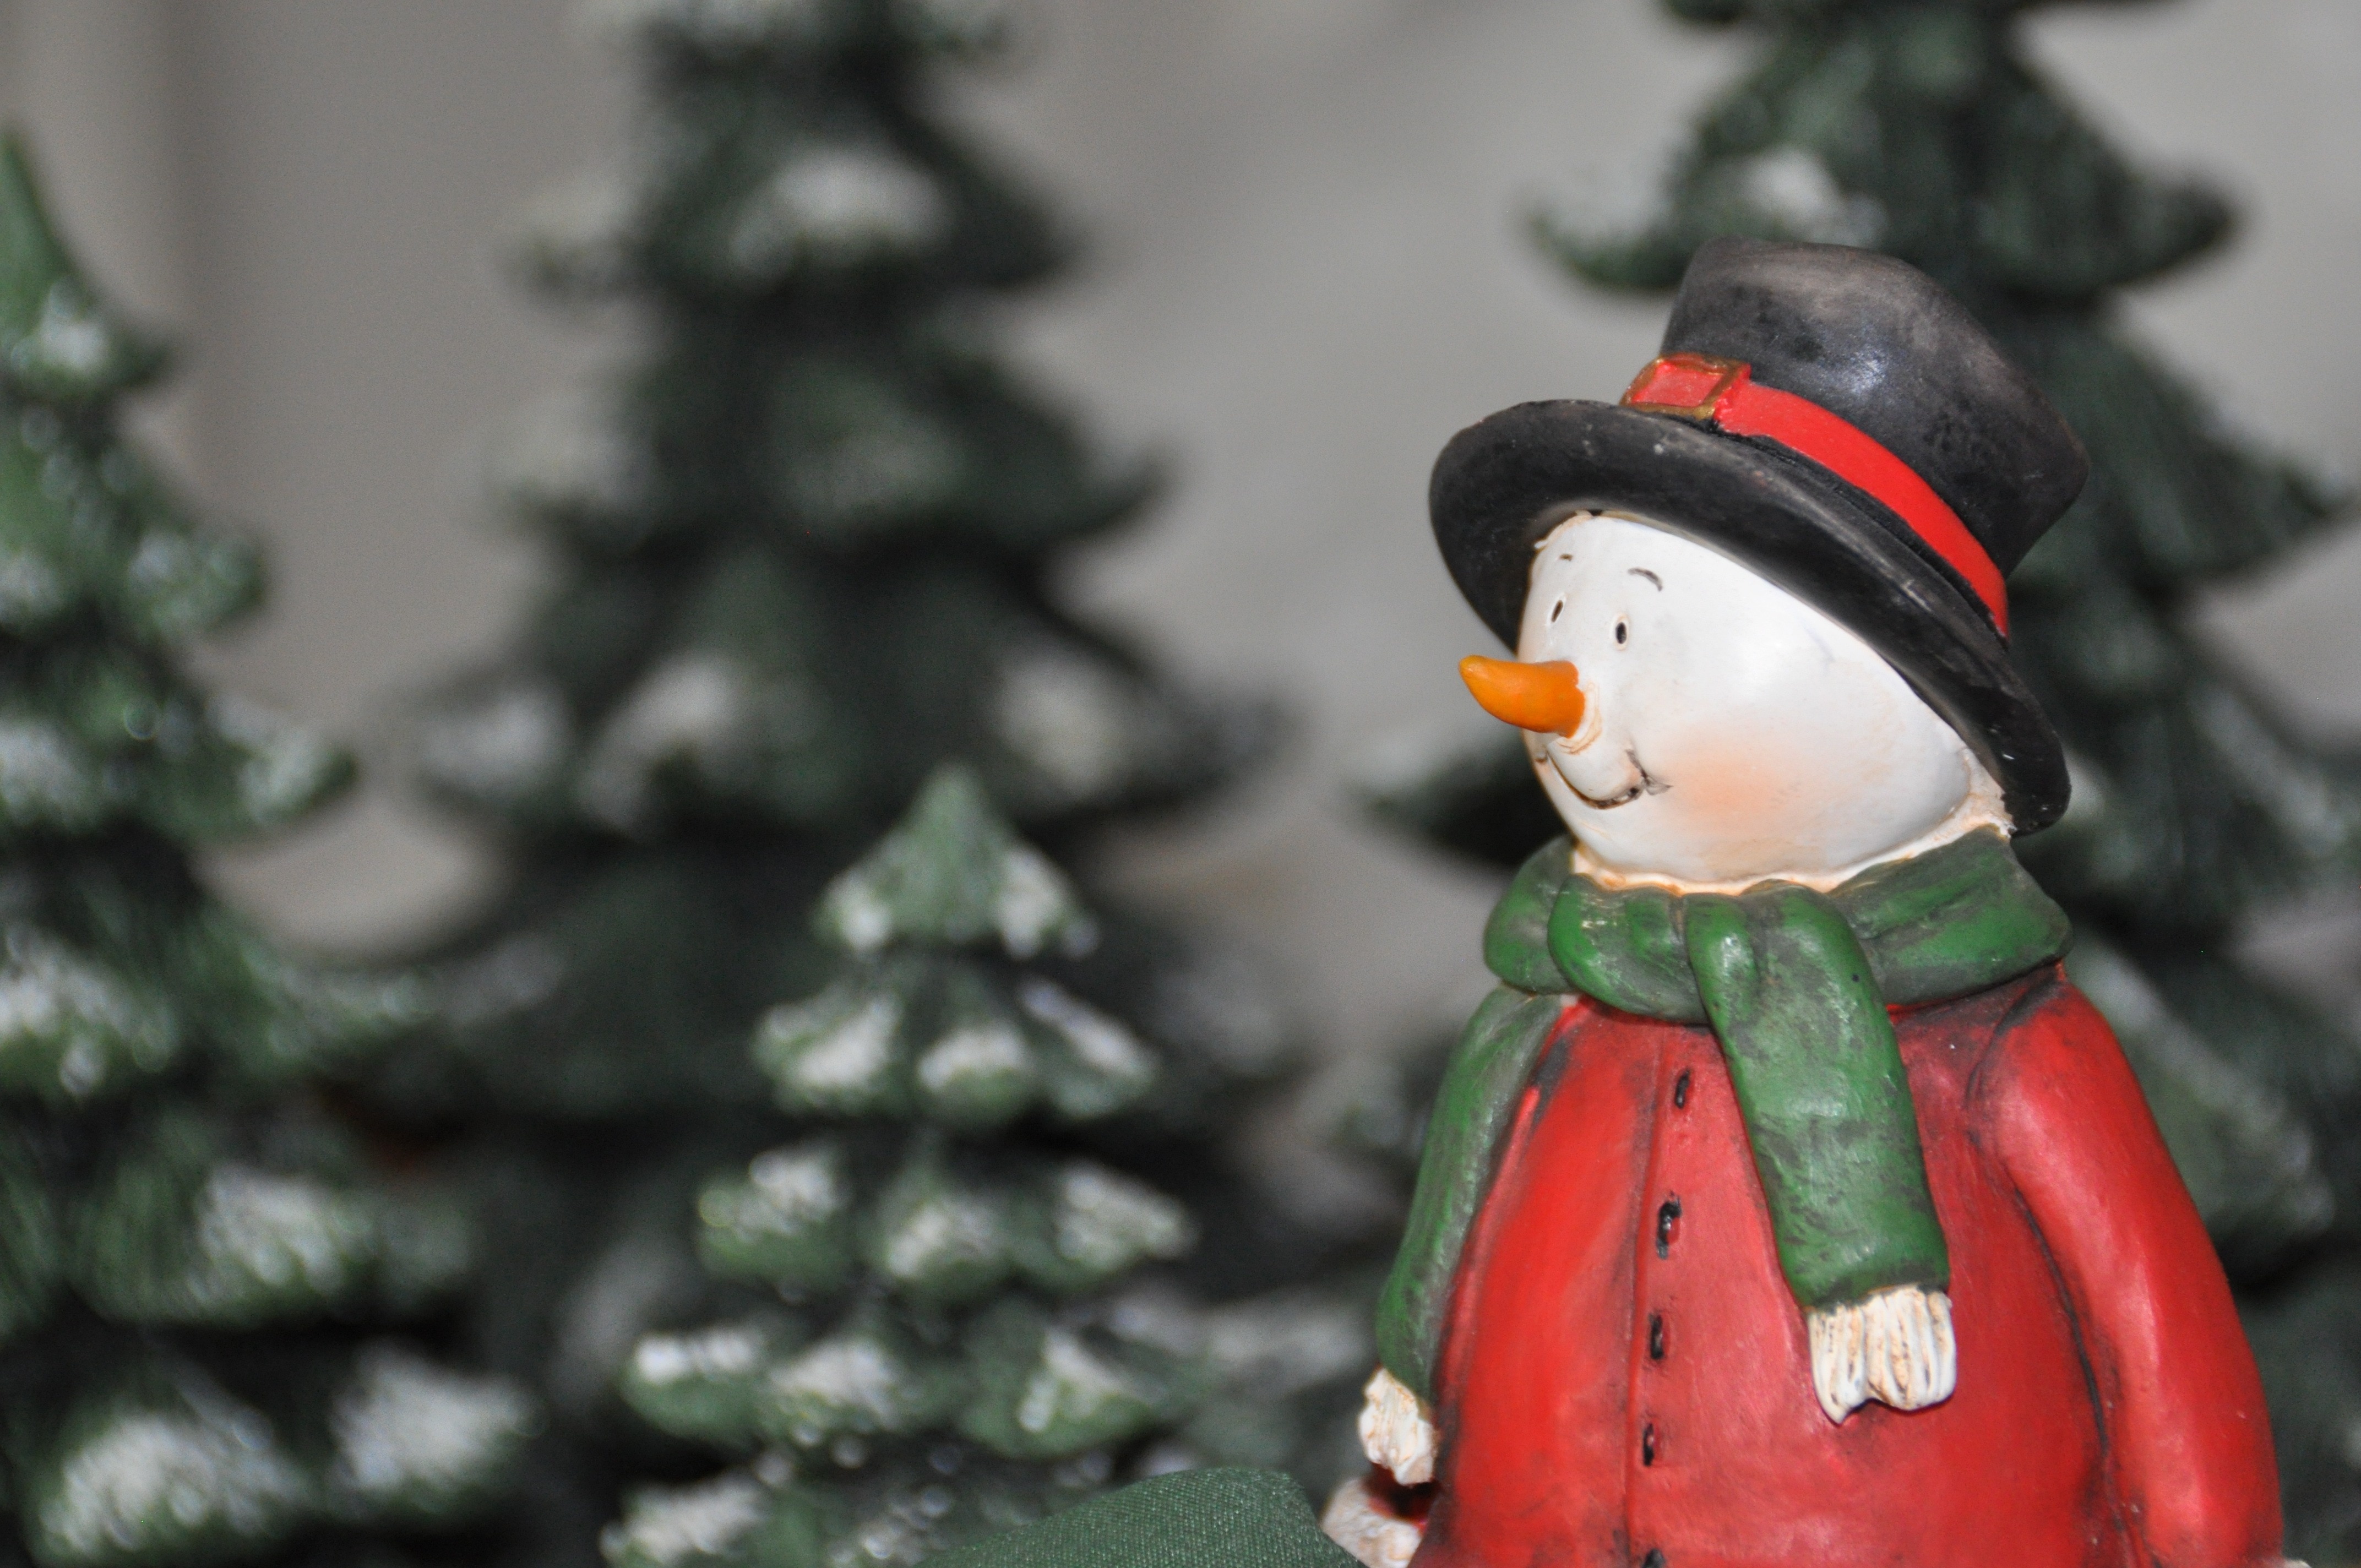 white and red snowman figurine